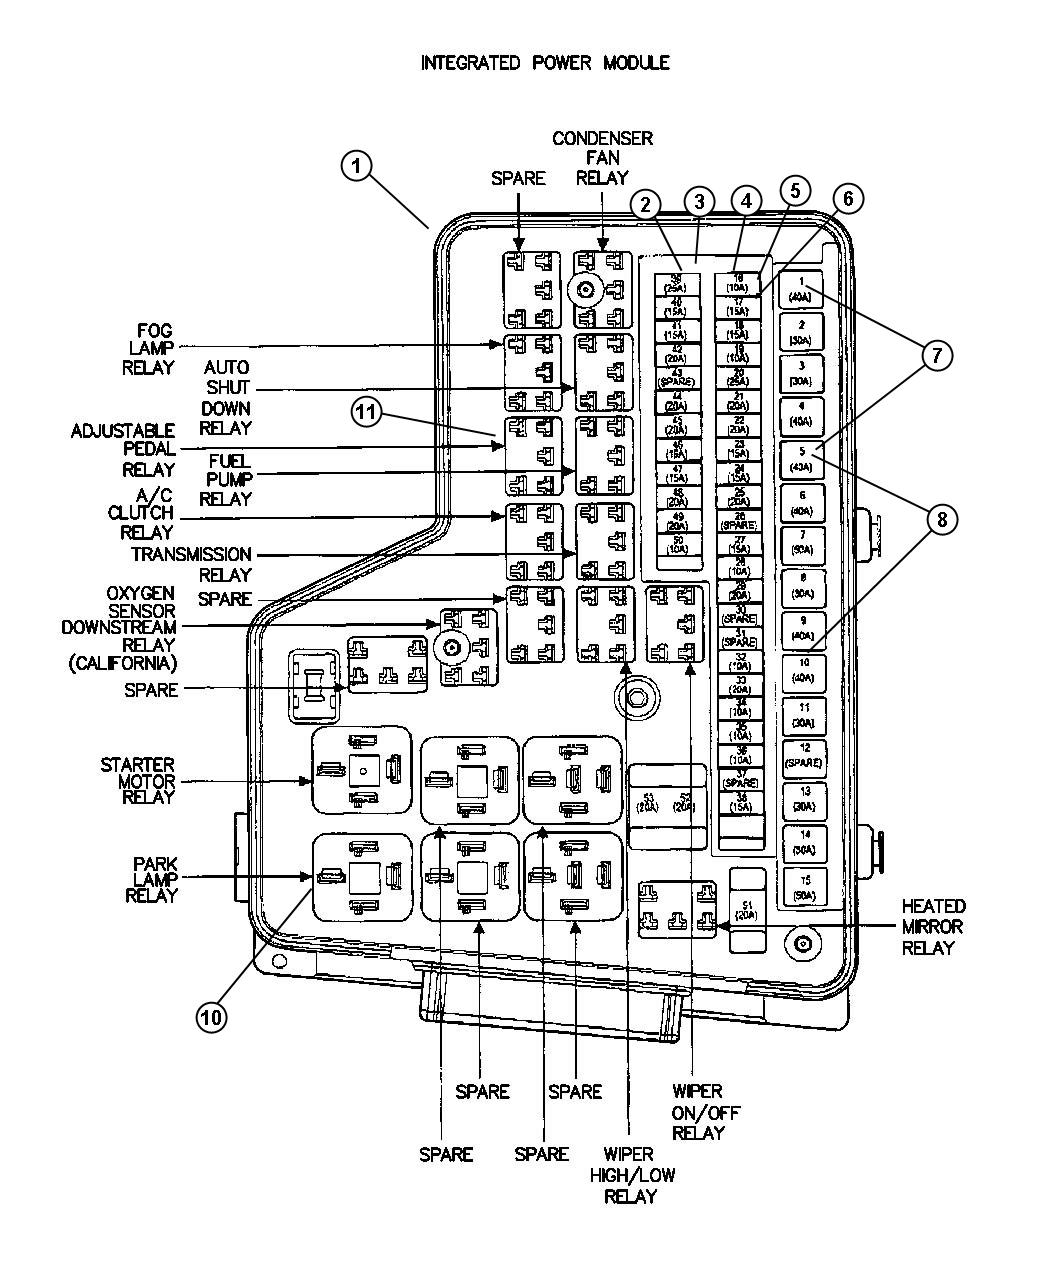 Power Distribution Center, Fuses and Relays. Diagram